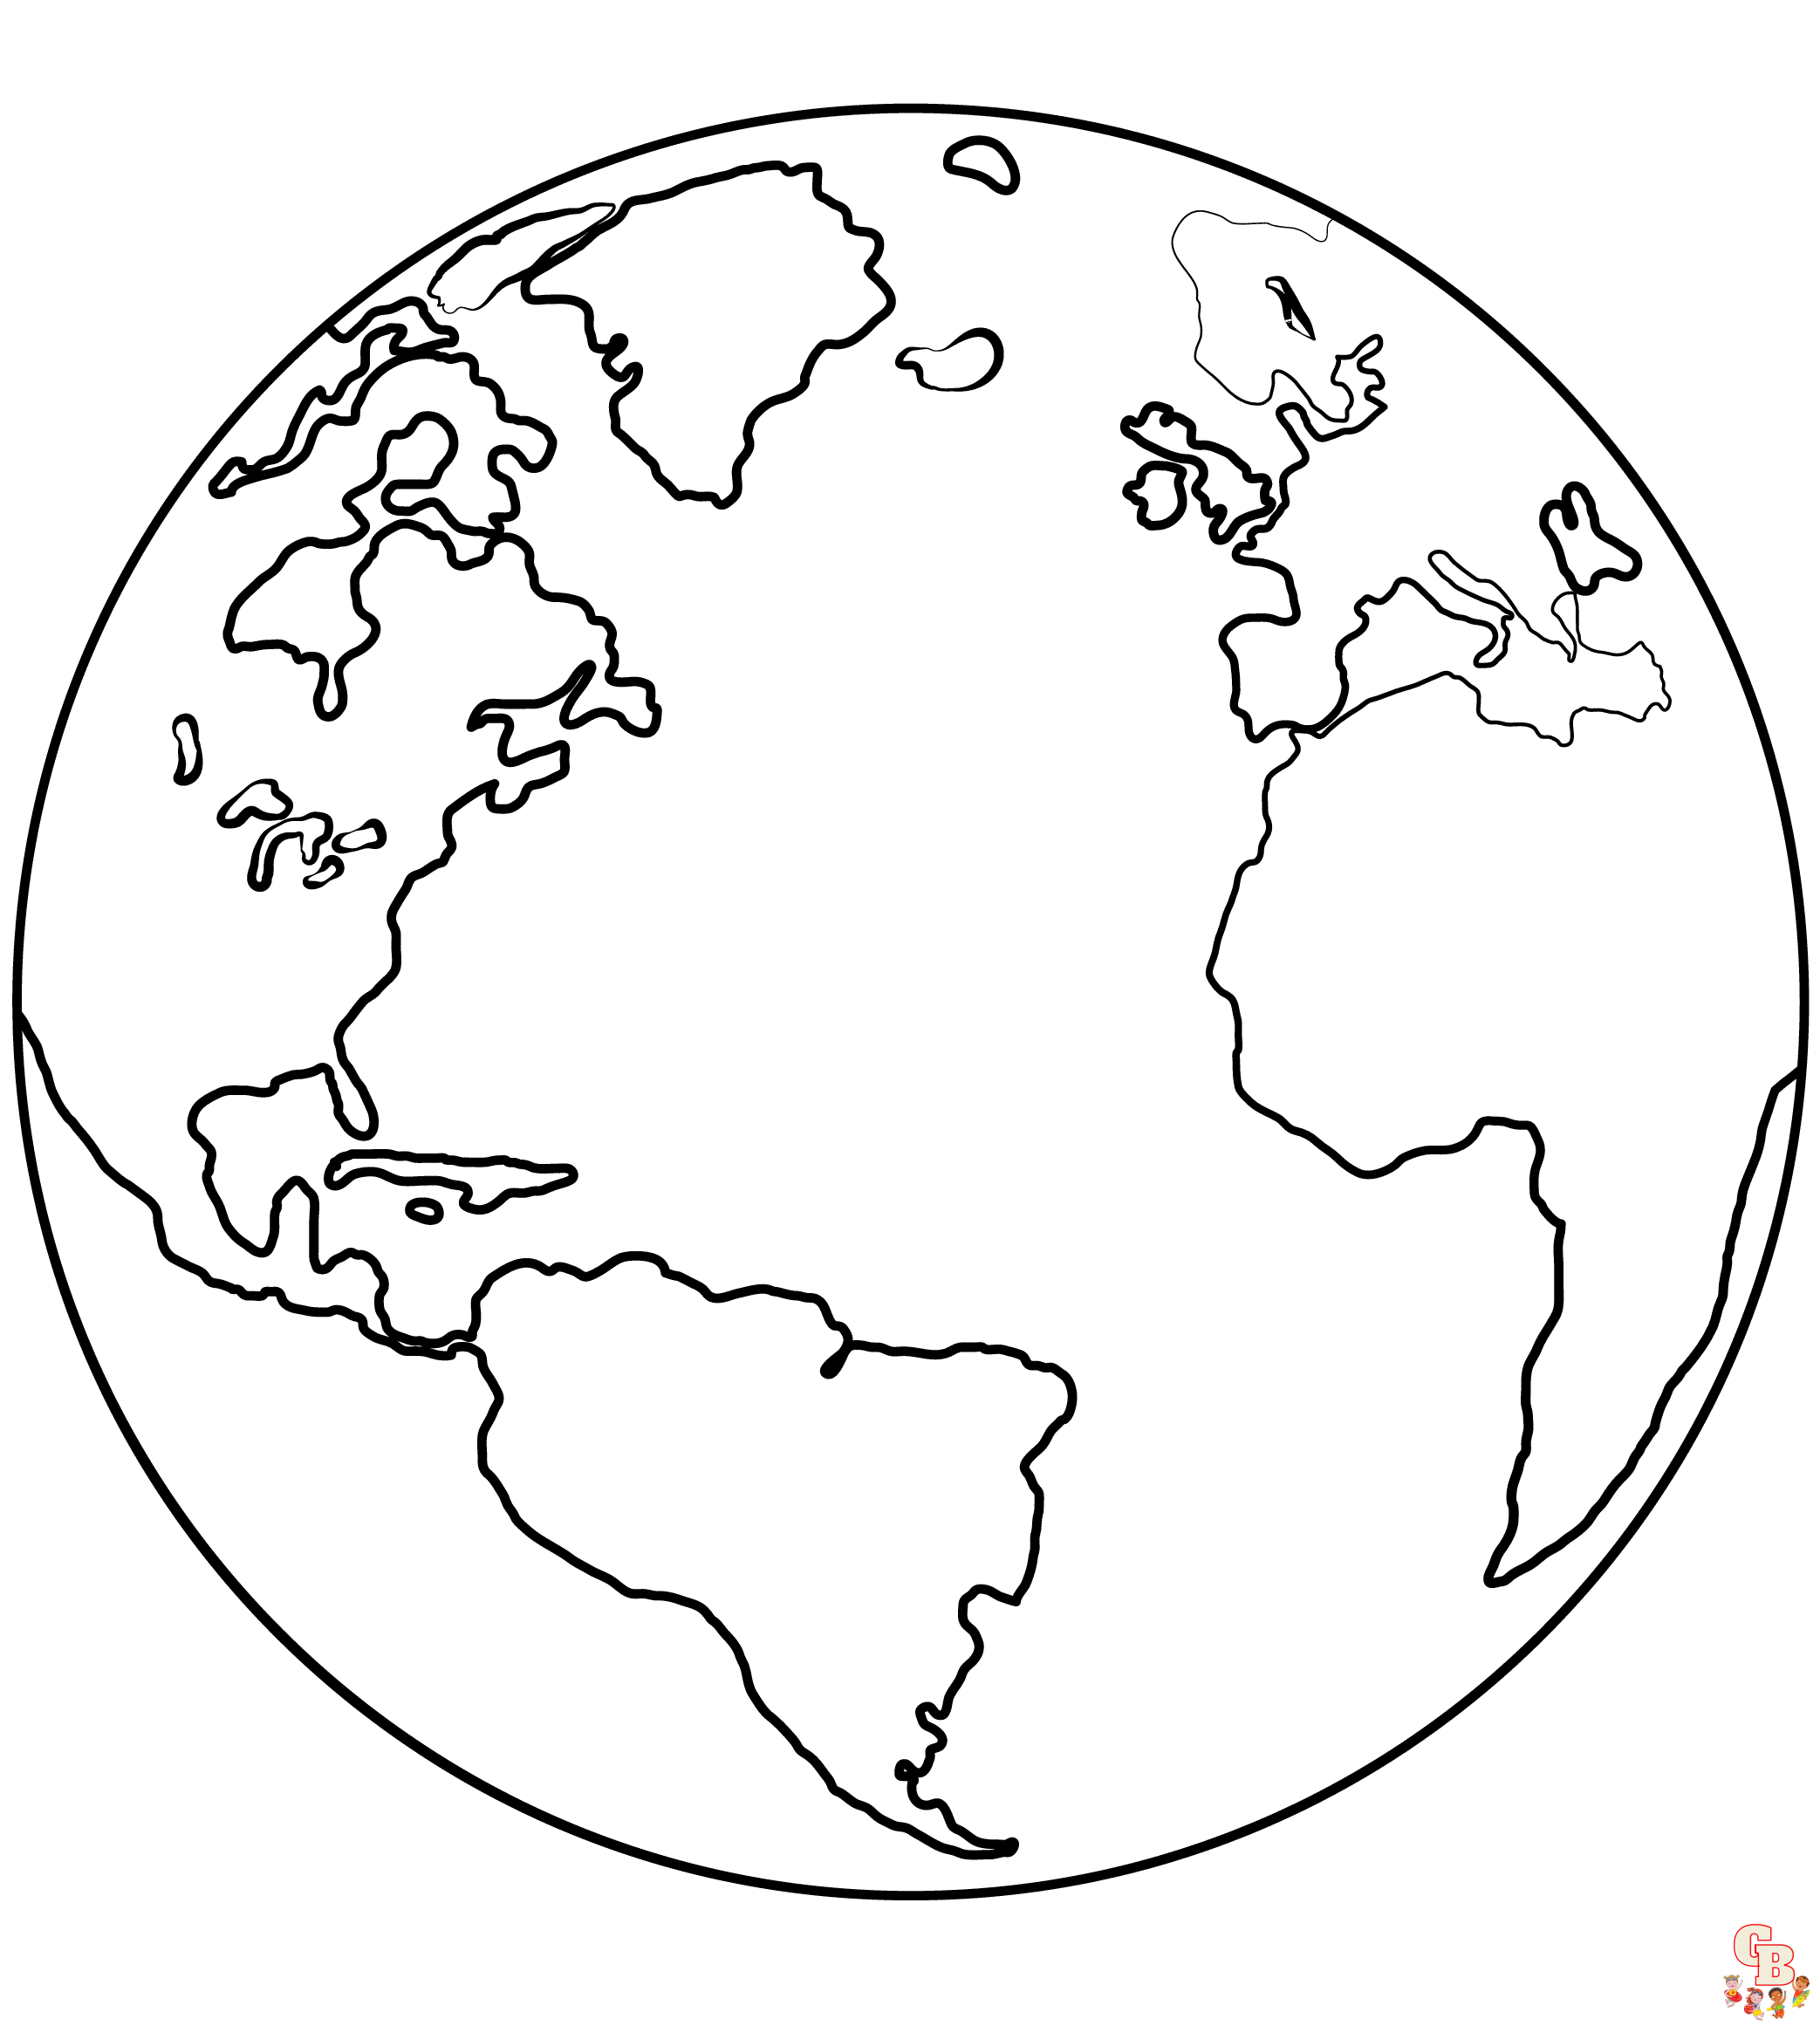 Earth Coloring Sheets free